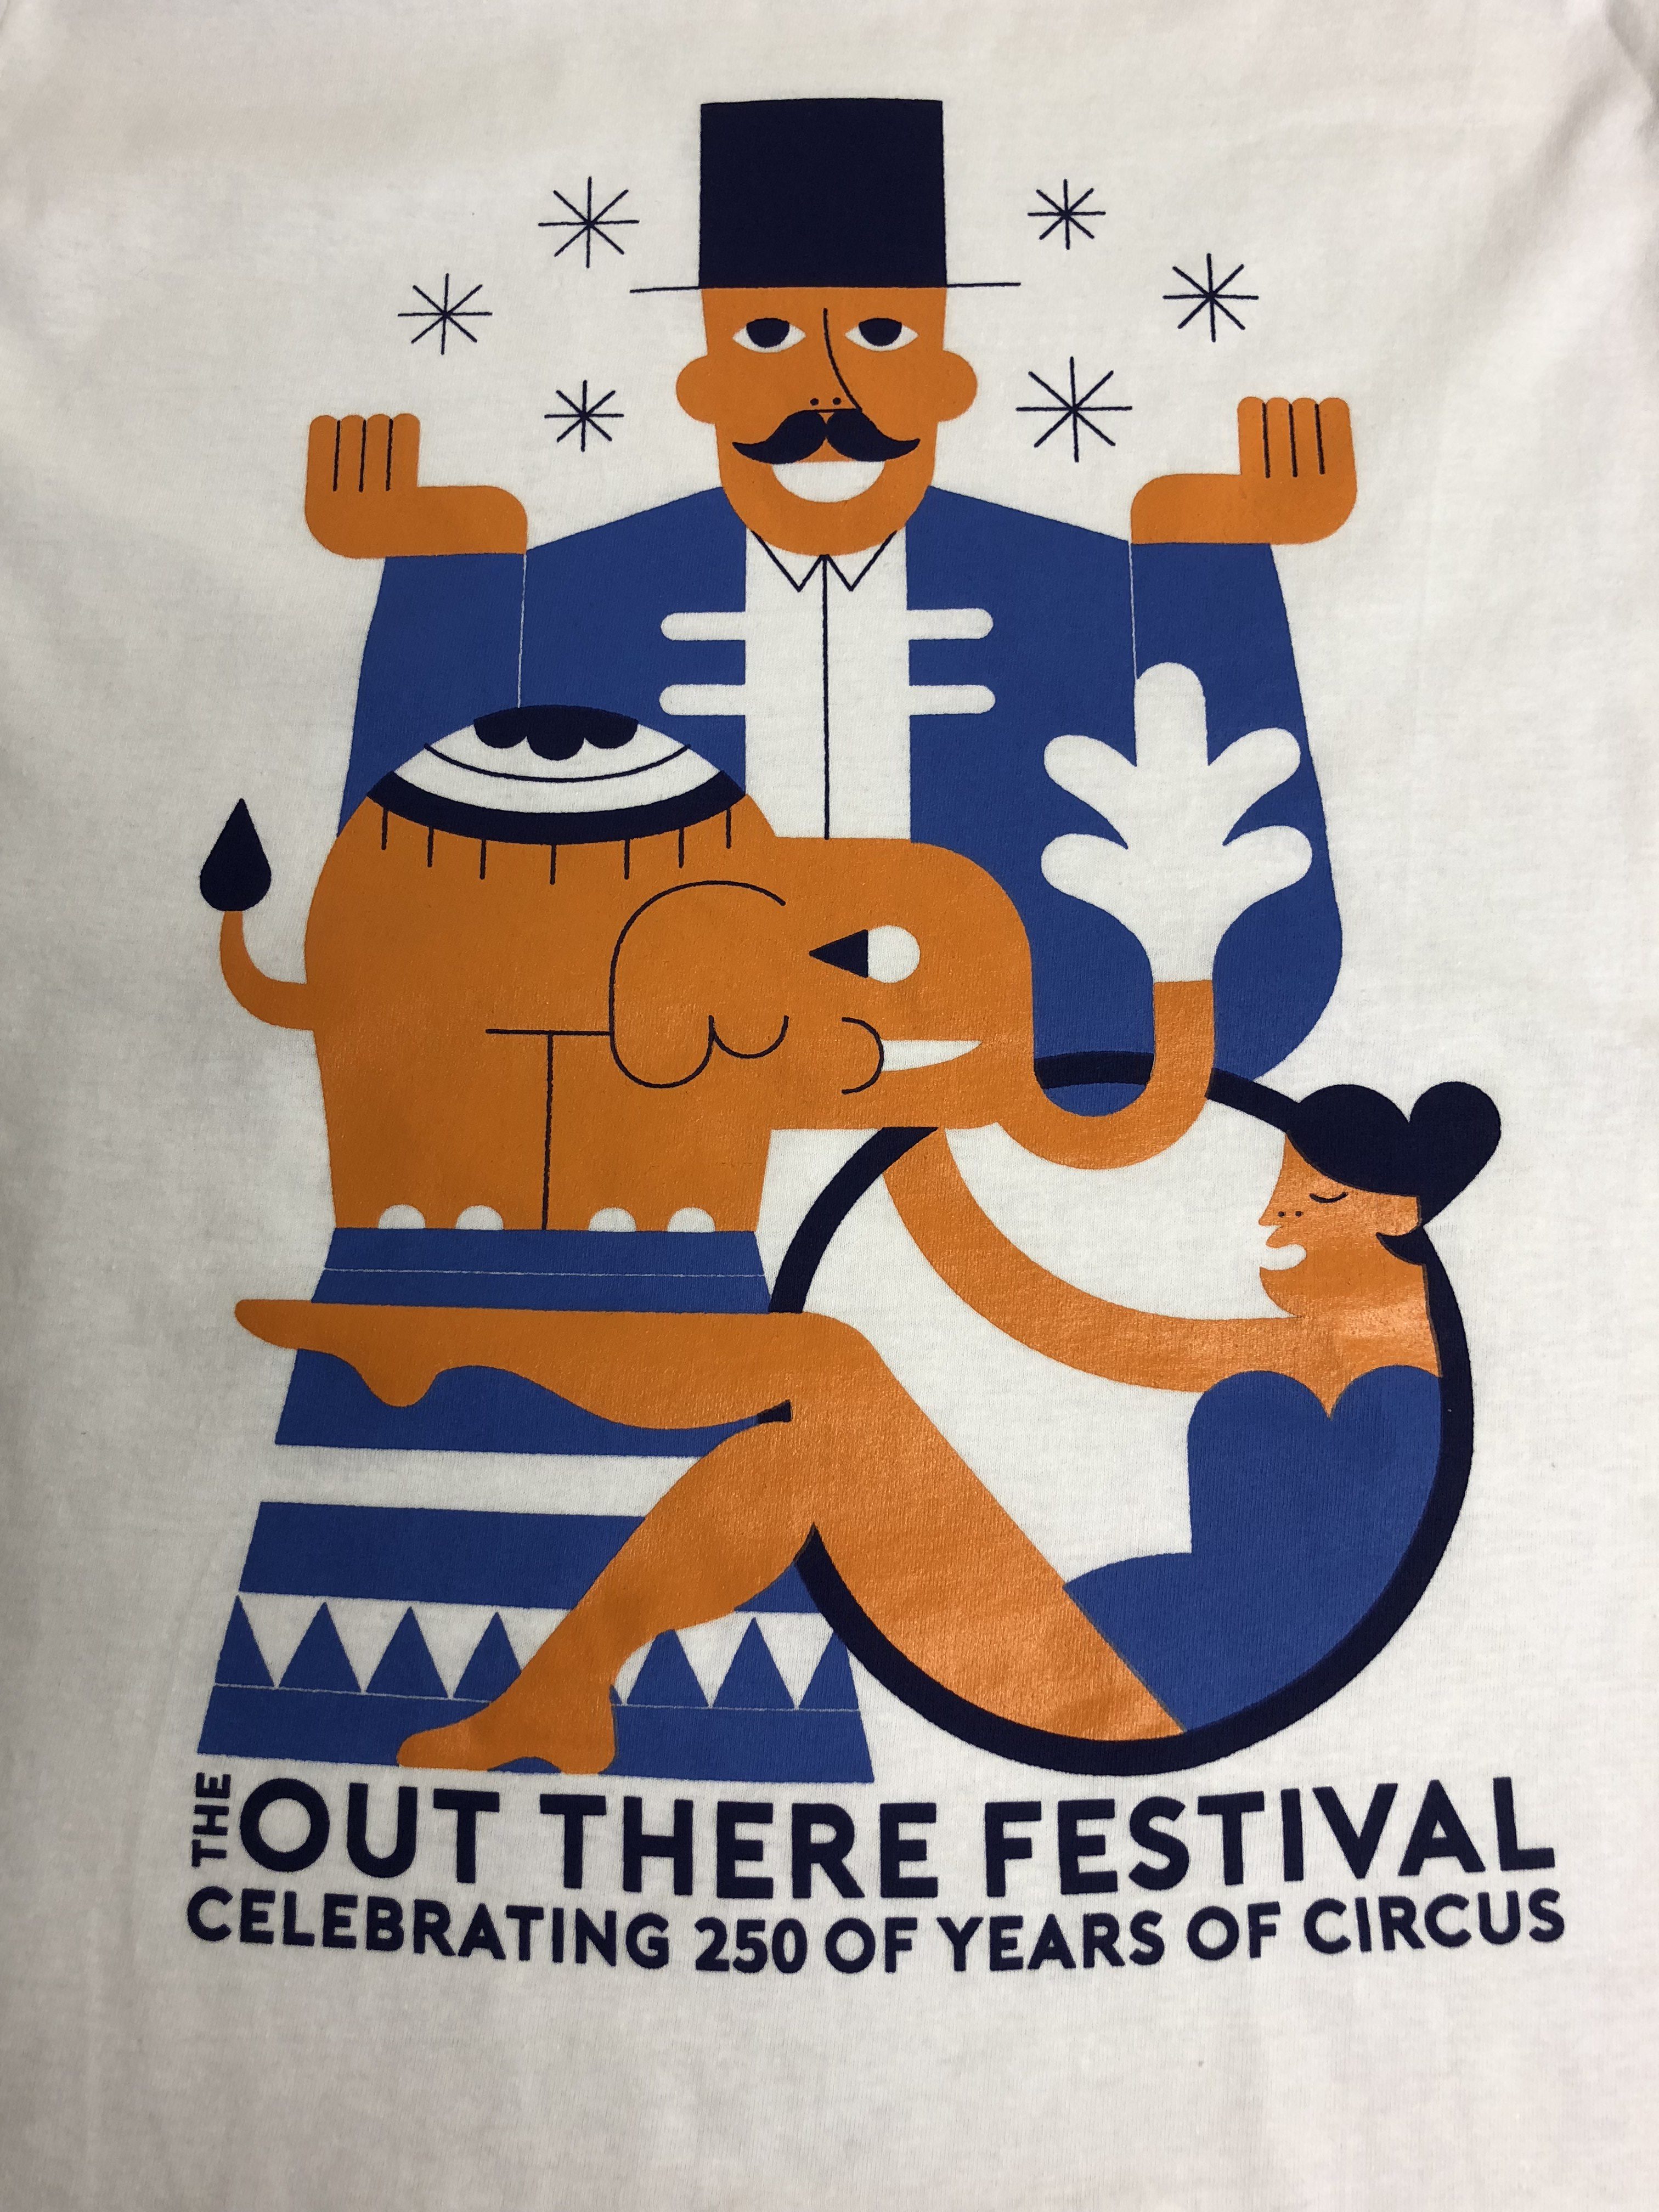 SeaChange Arts – The Out There Festival